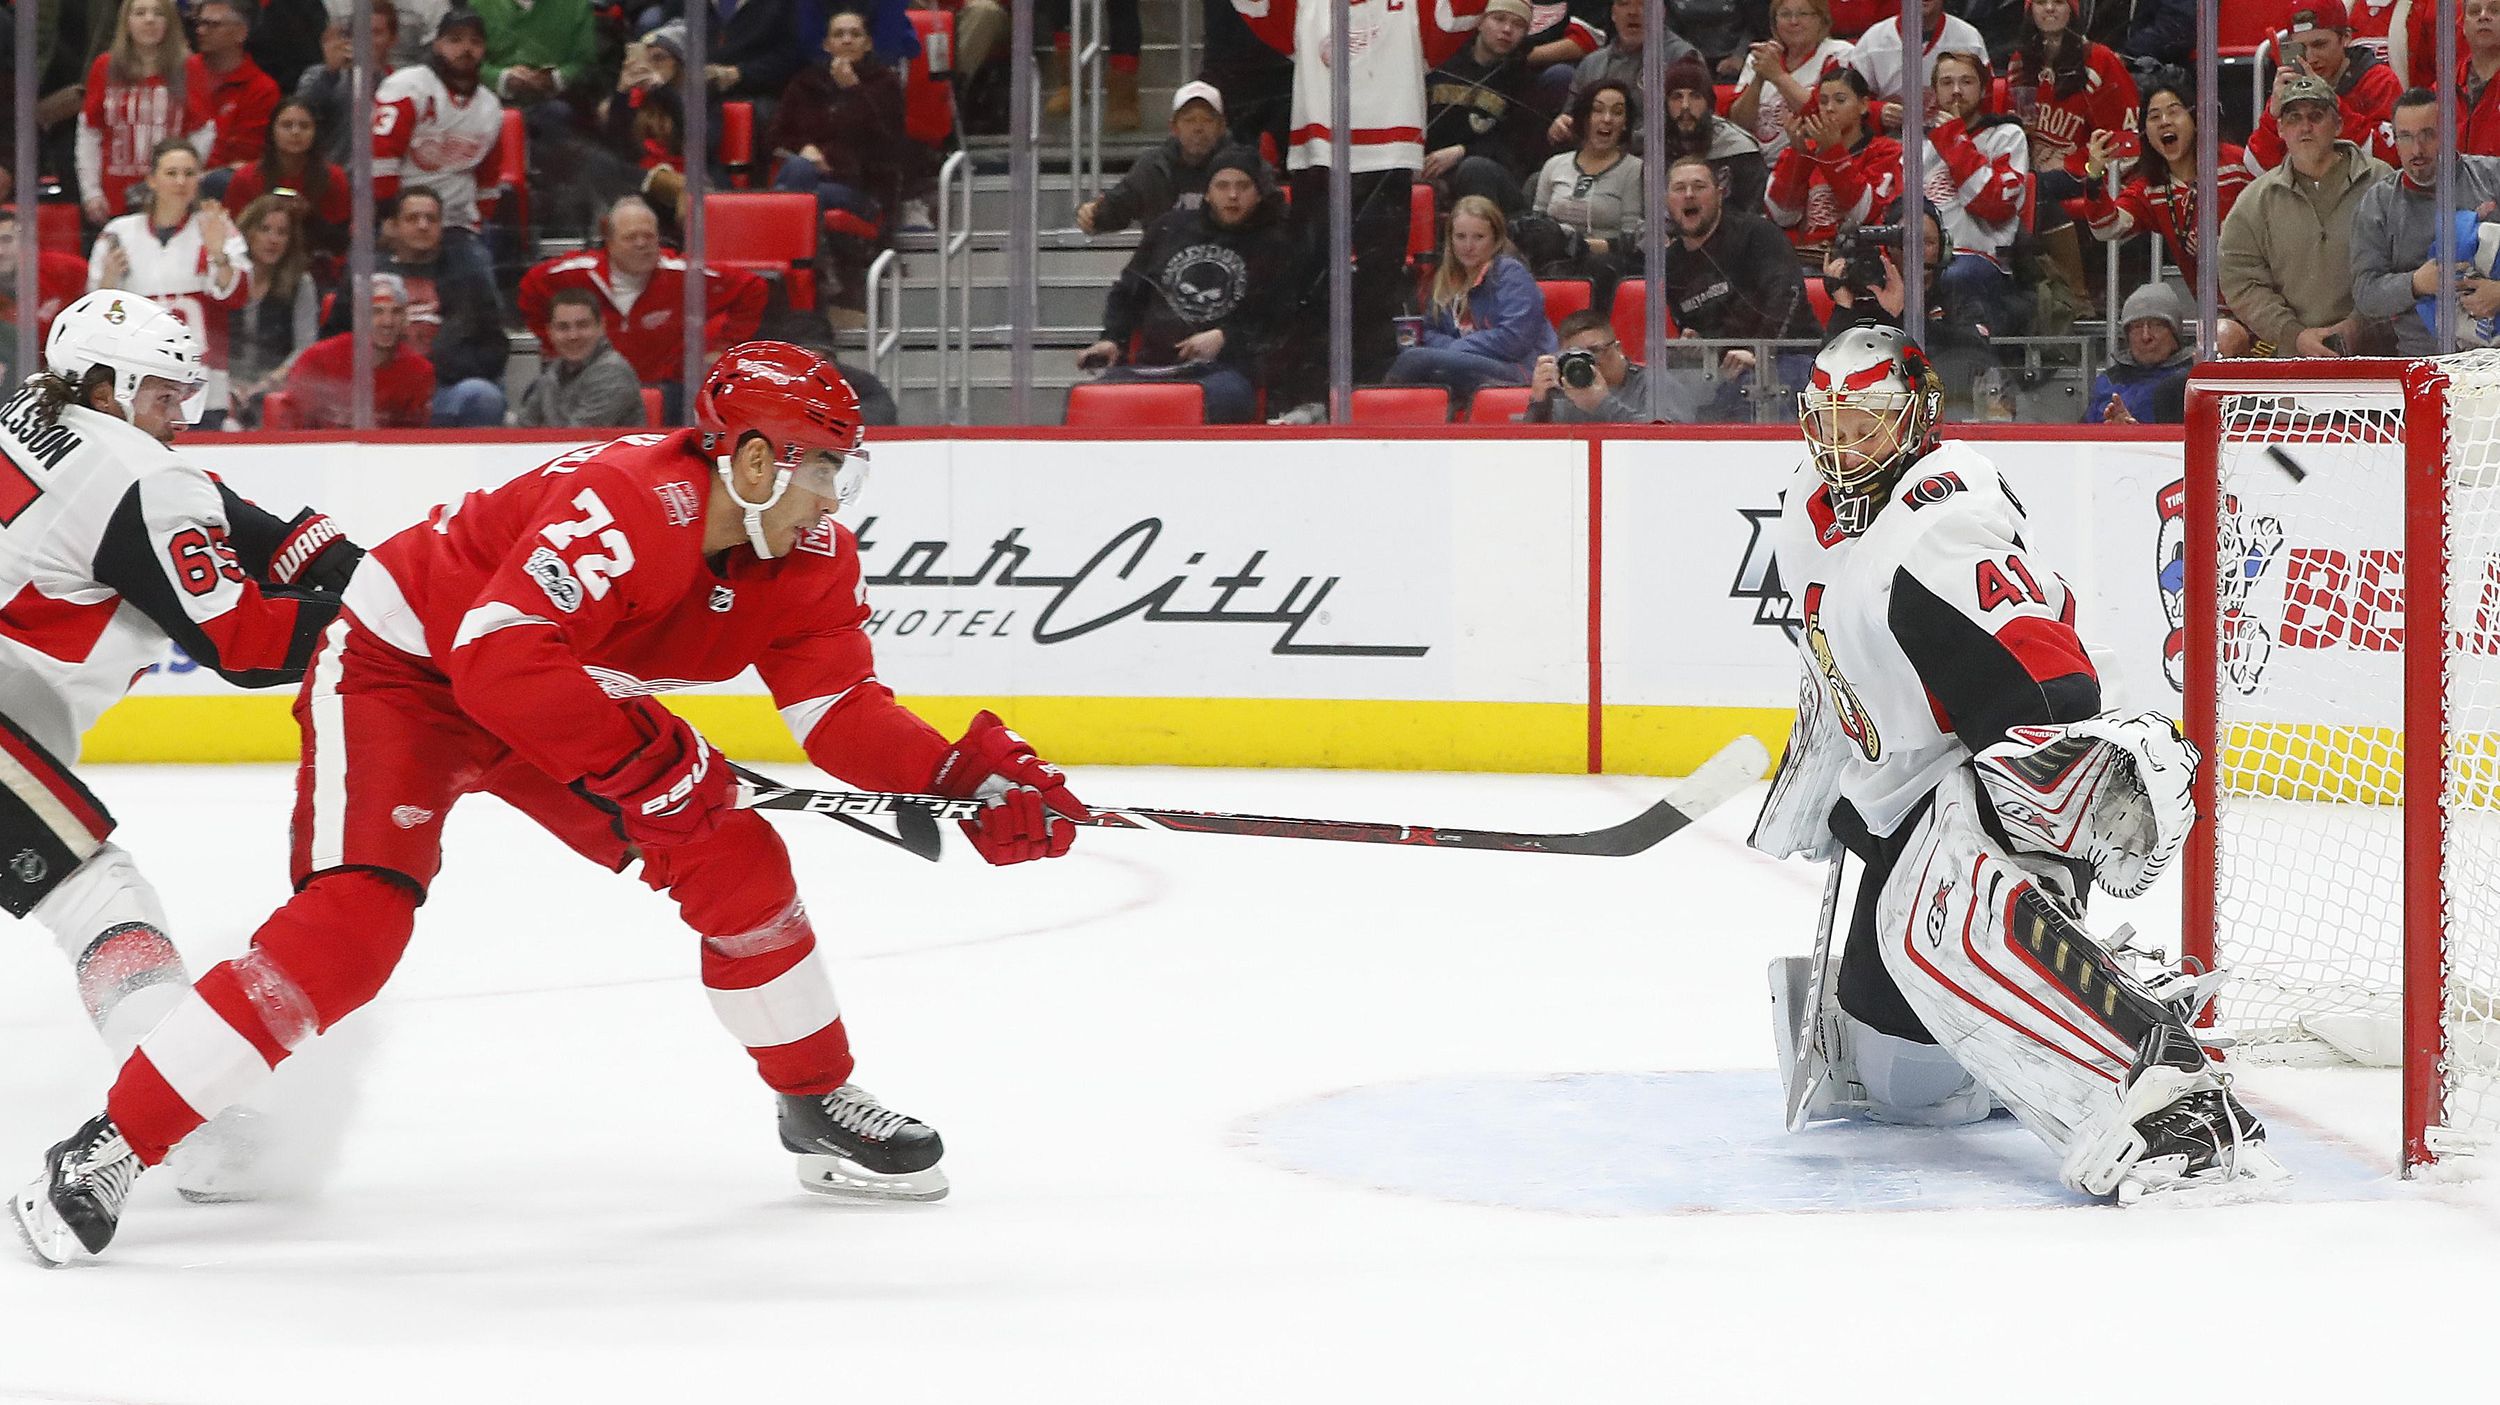 Tamp Bay Lightning top Detroit Red Wings in overtime